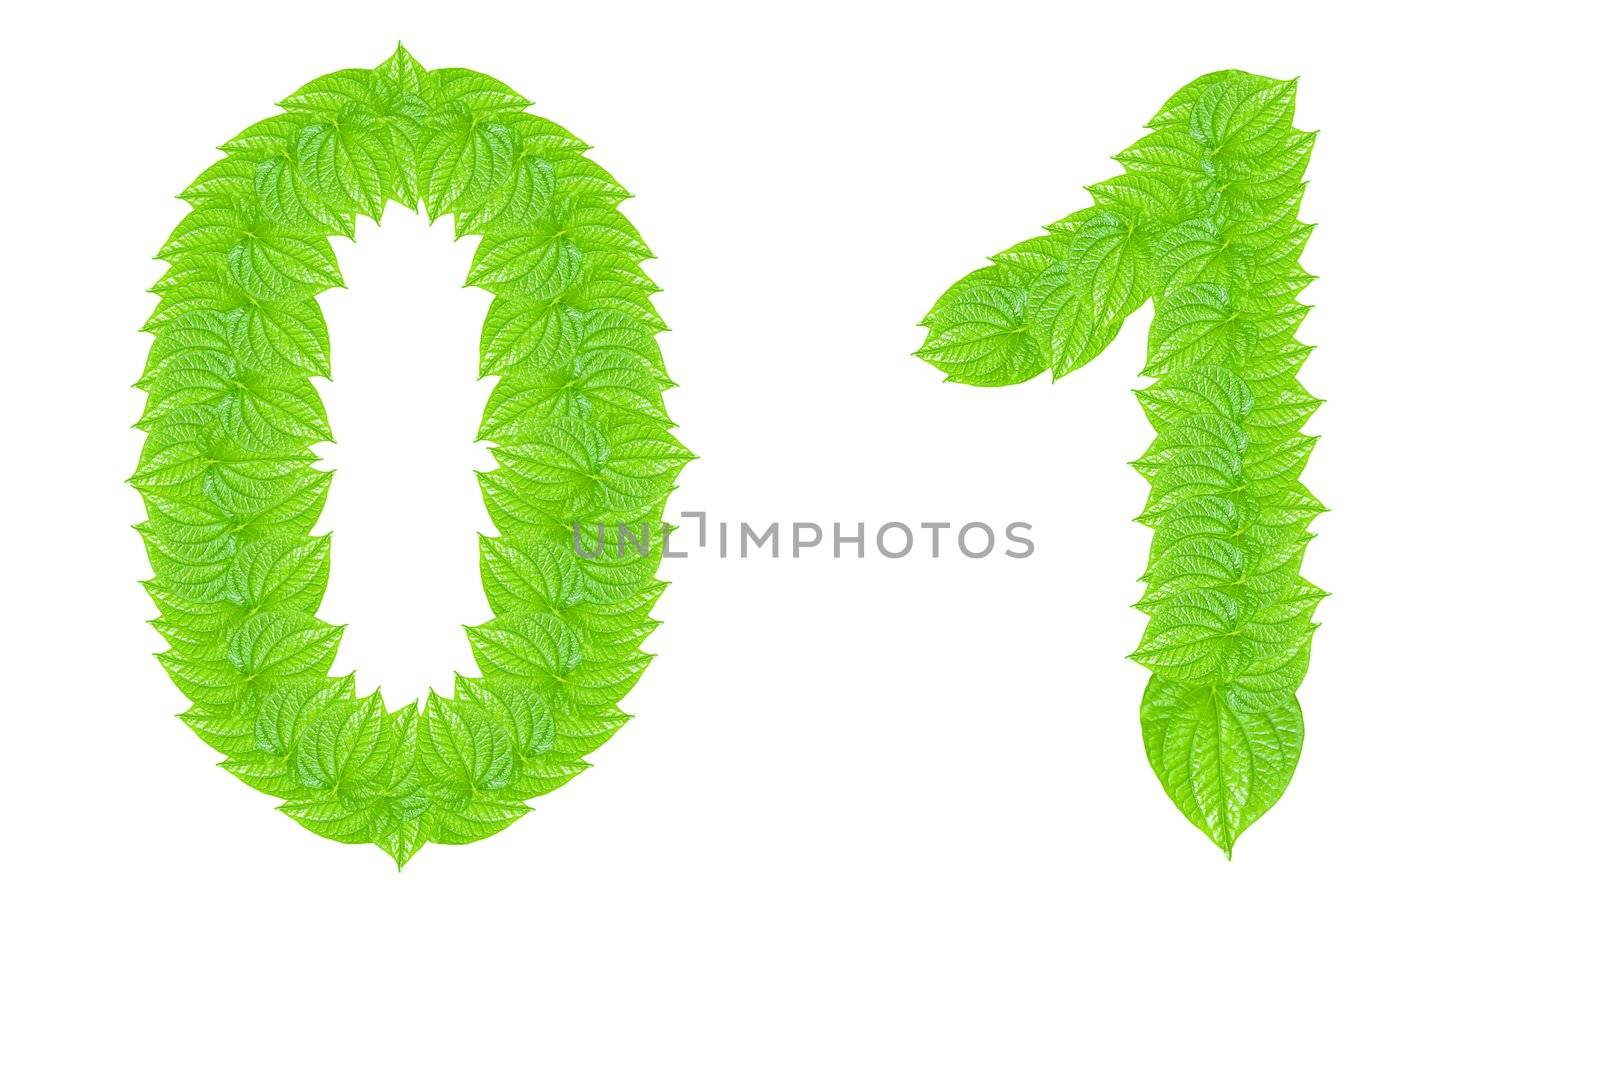 Number made from green leafs with number 0 to 1